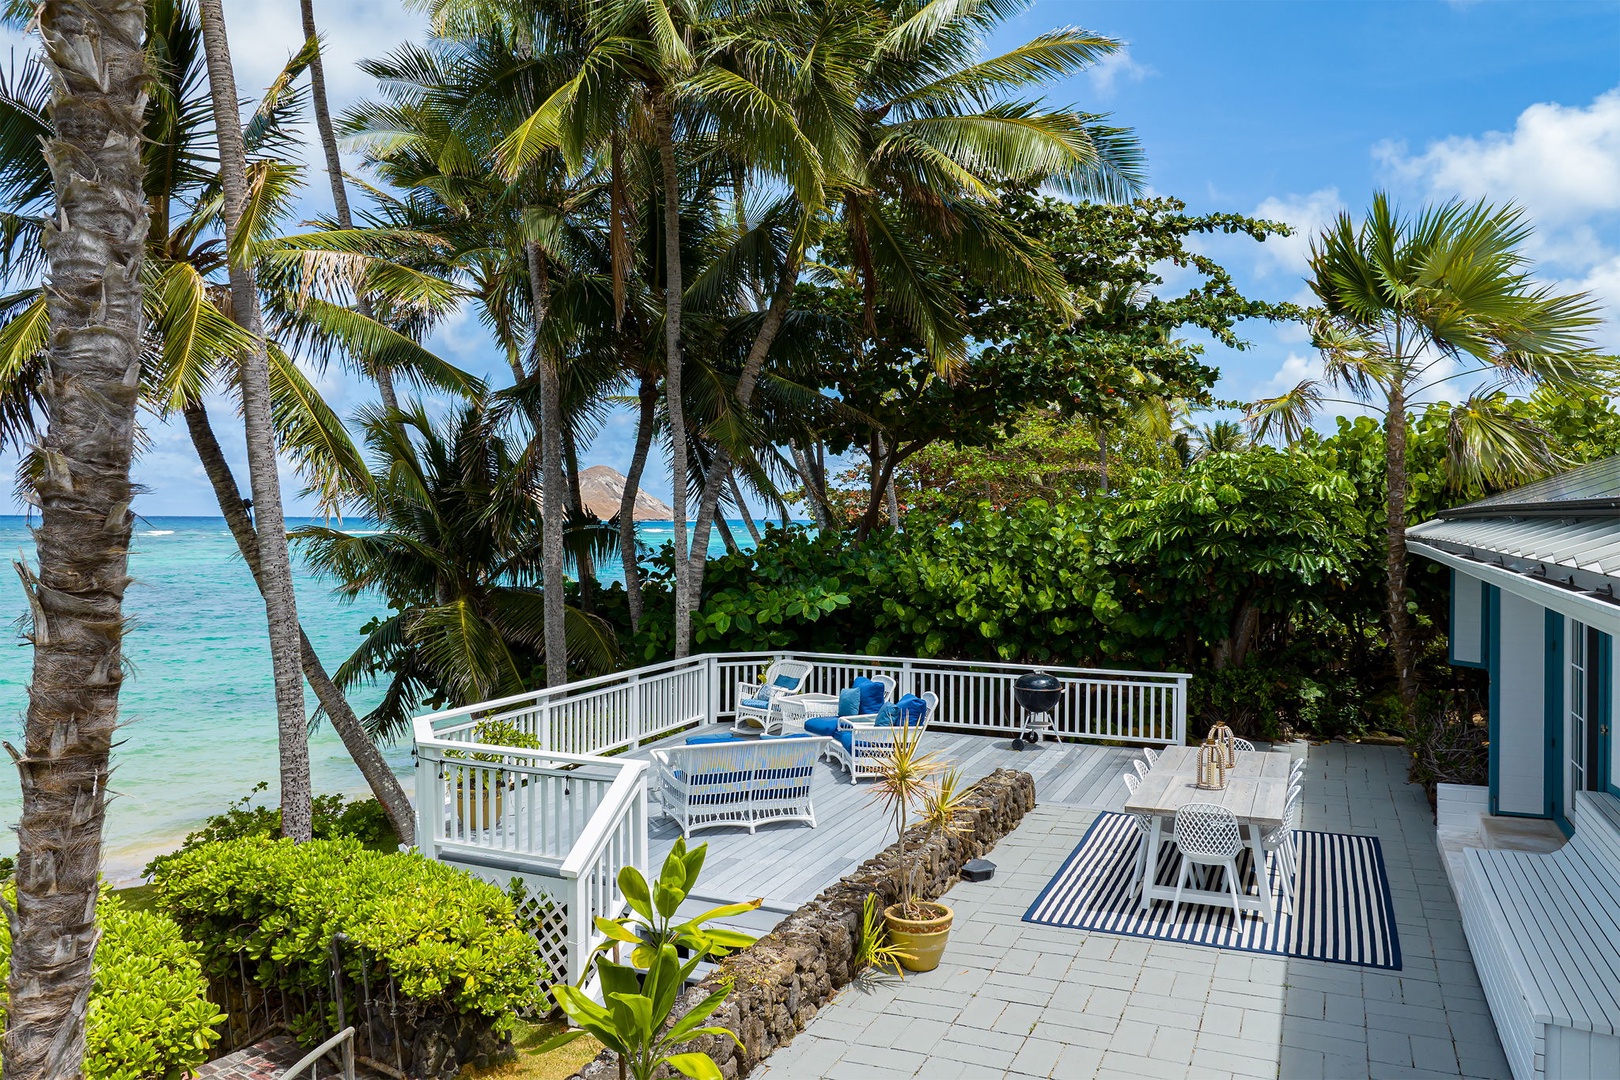 Waimanalo Vacation Rentals, Mana Kai at Waimanalo - Spacious lanai decked with ample outdoor furniture, and a perfect table setting for alfresco dining amidst gentle breezes.